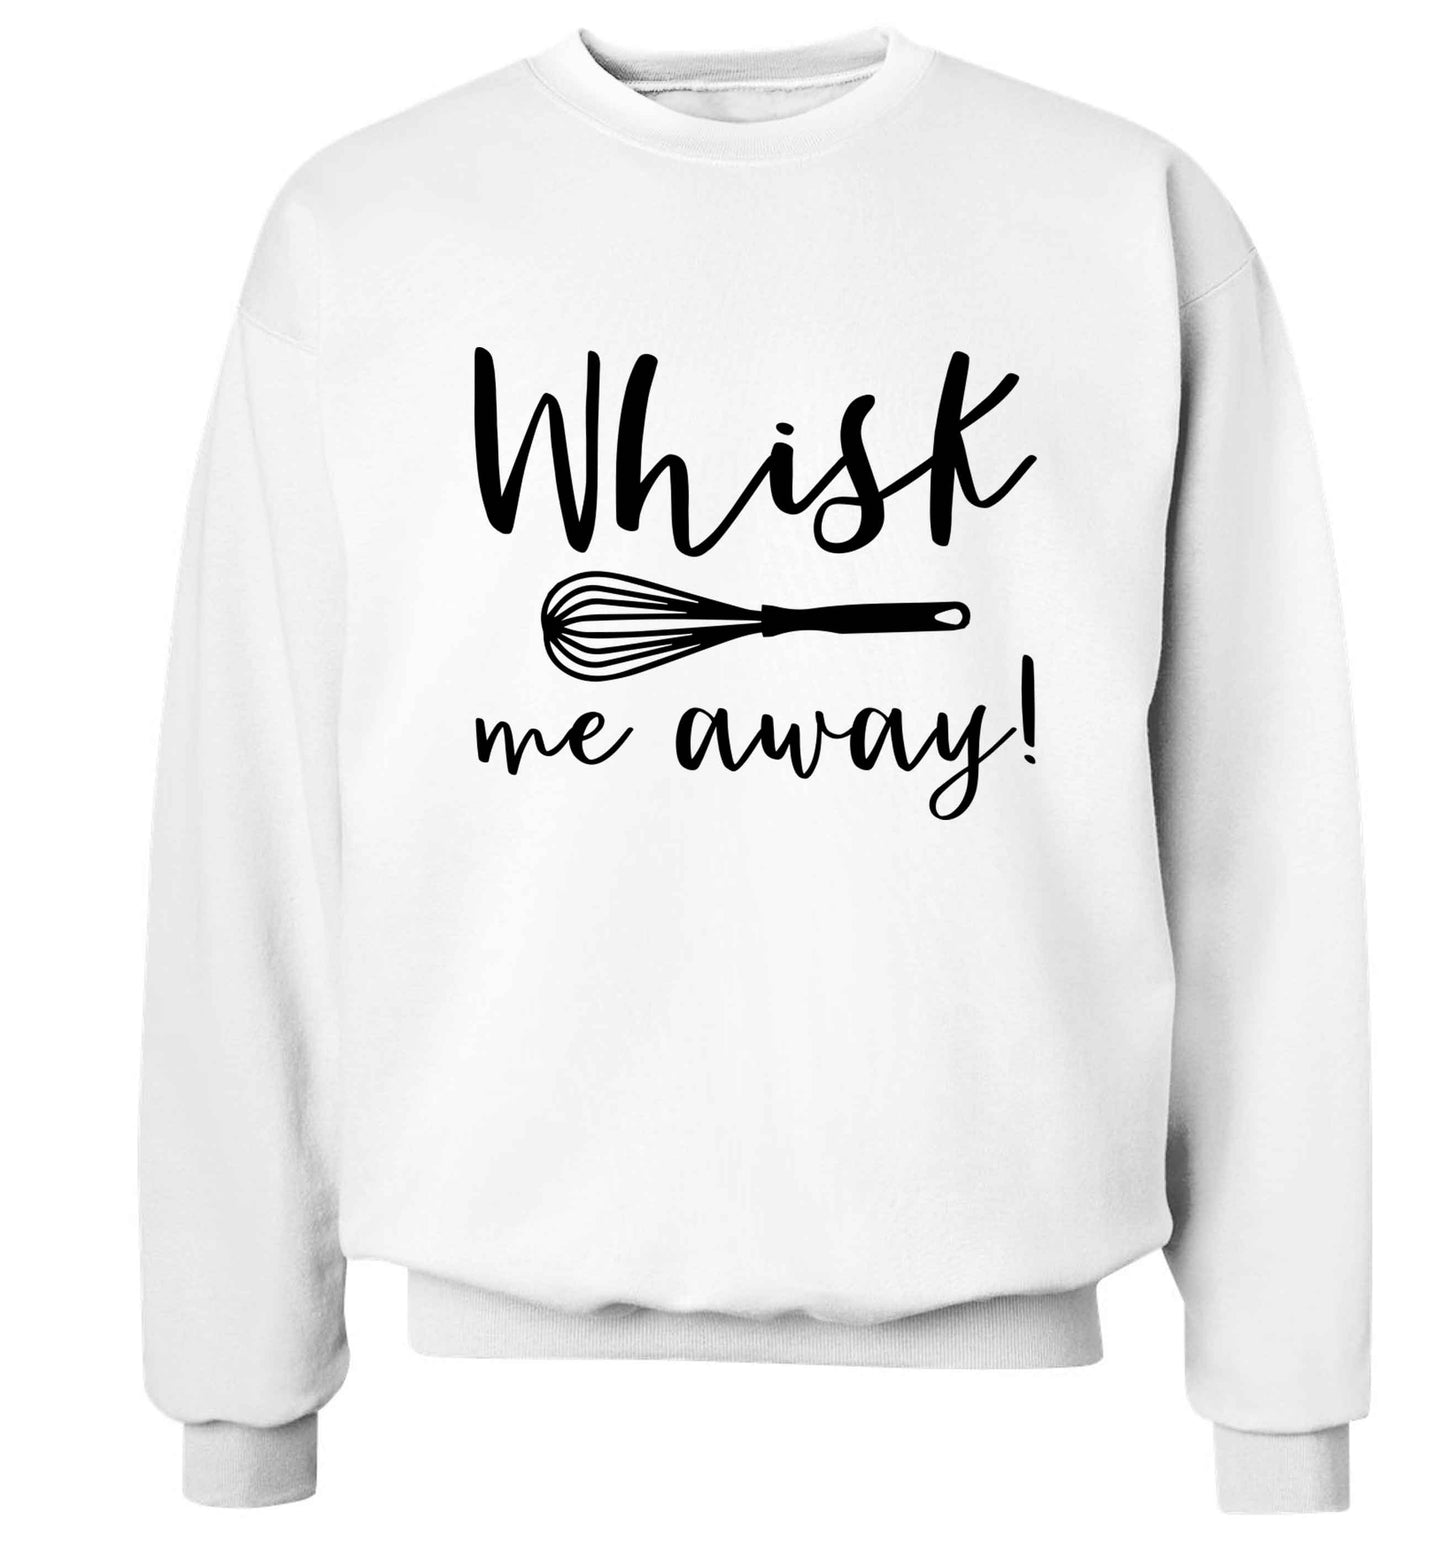 Whisk me away Adult's unisex white Sweater 2XL